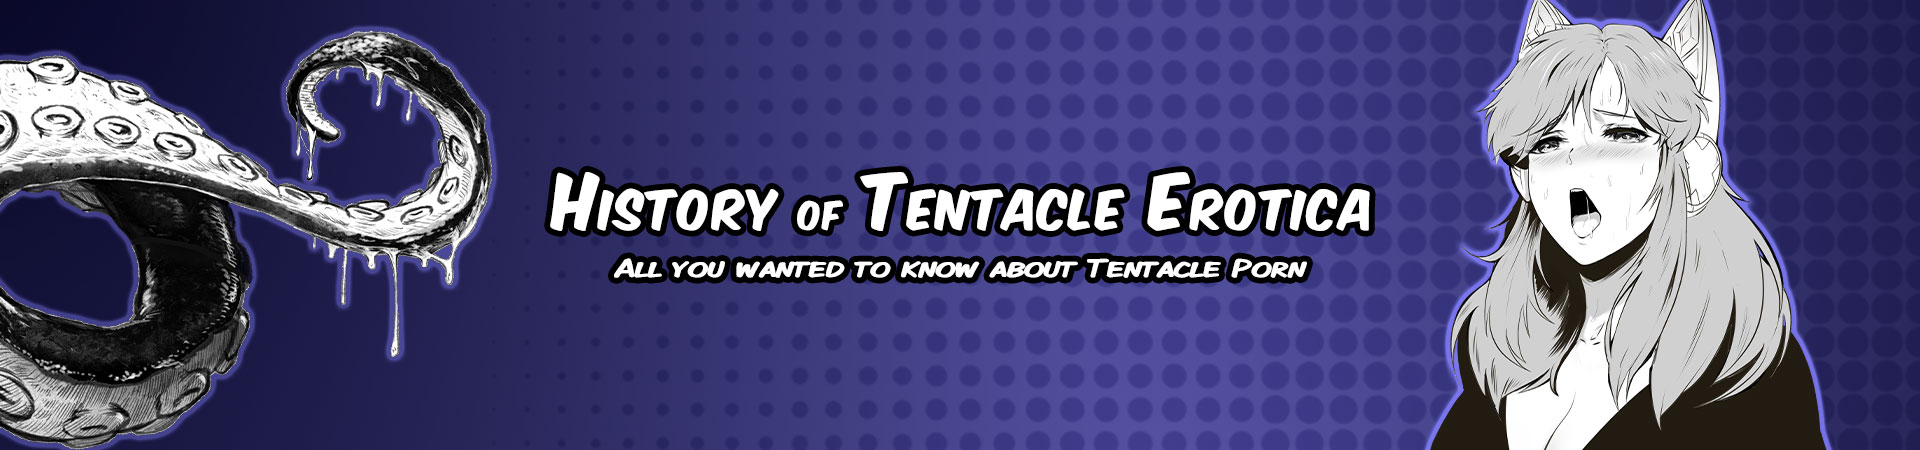 History of Tentacle Erotica - All you wanted to know about Tentacle Porn